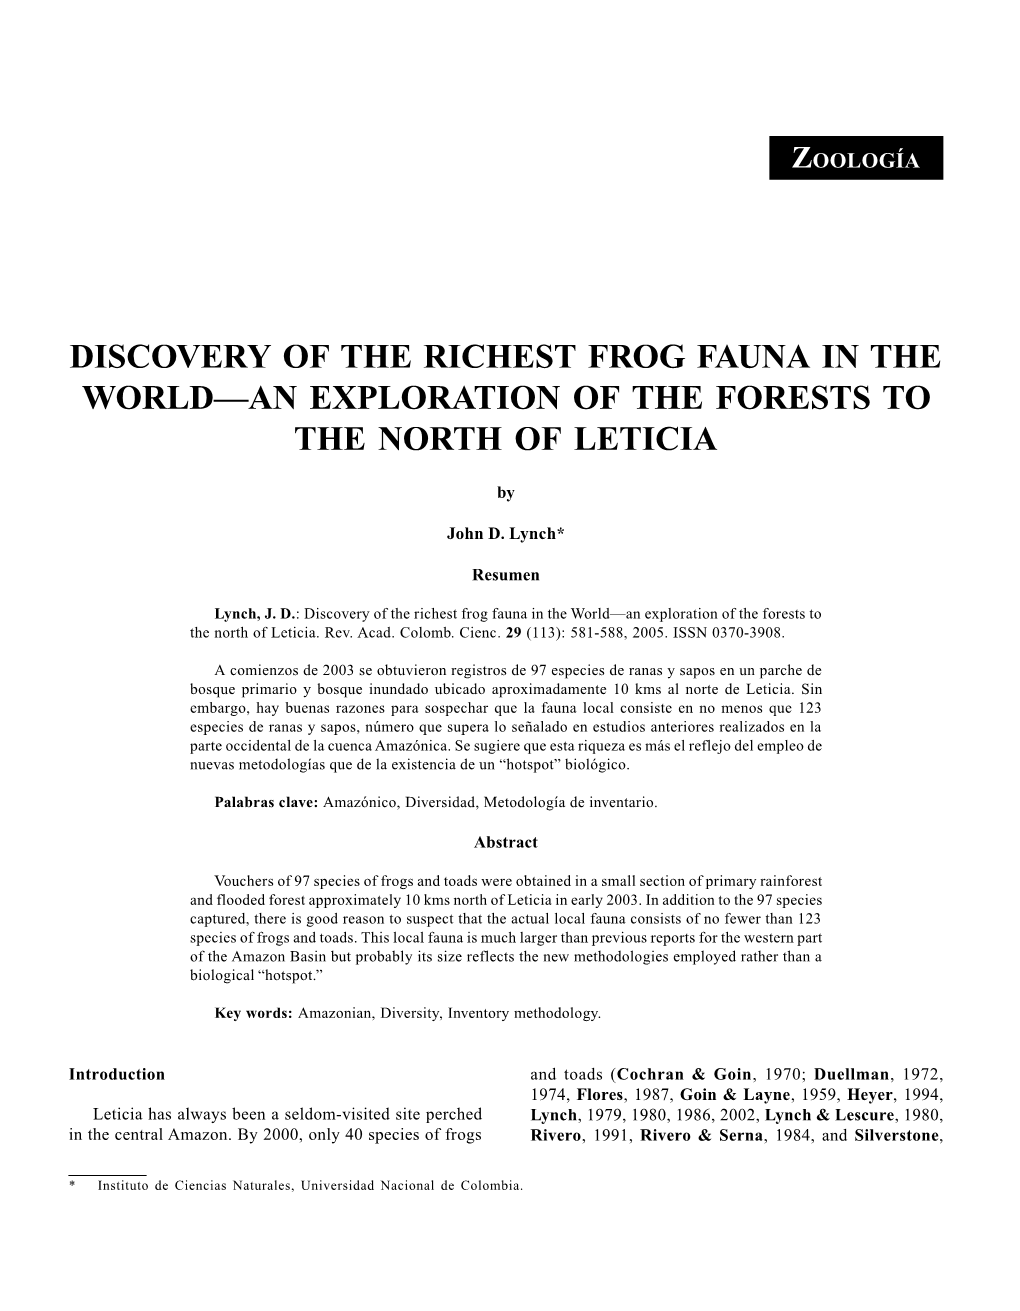 Discovery of the Richest Frog Fauna in the World—An Exploration of the Forests to the North of Leticia